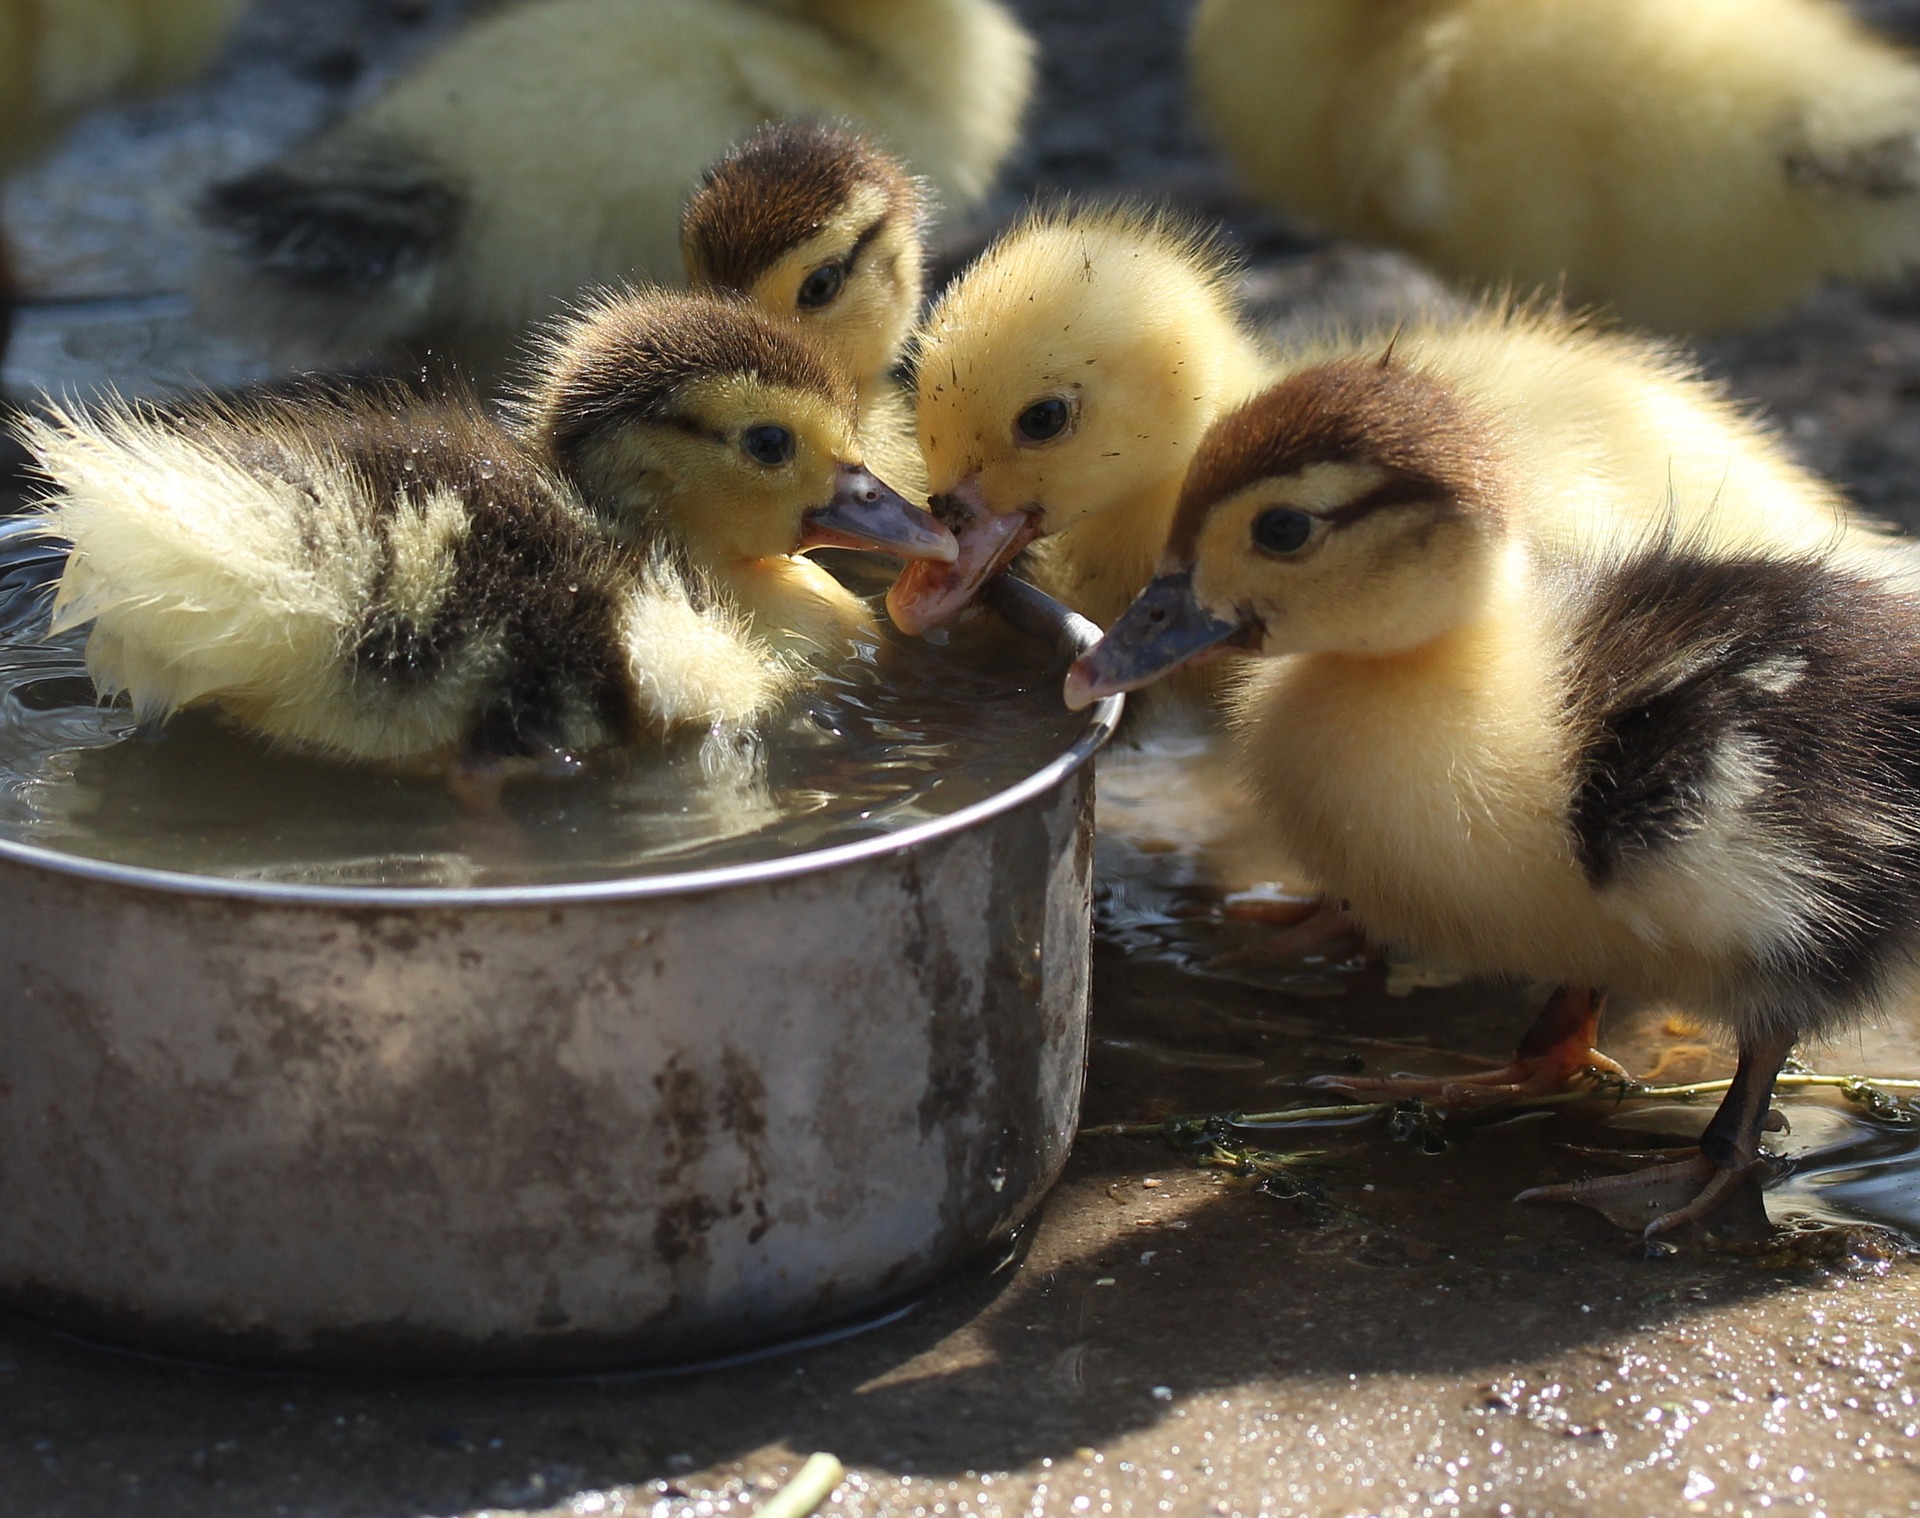 Caring for Abandoned Ducklings